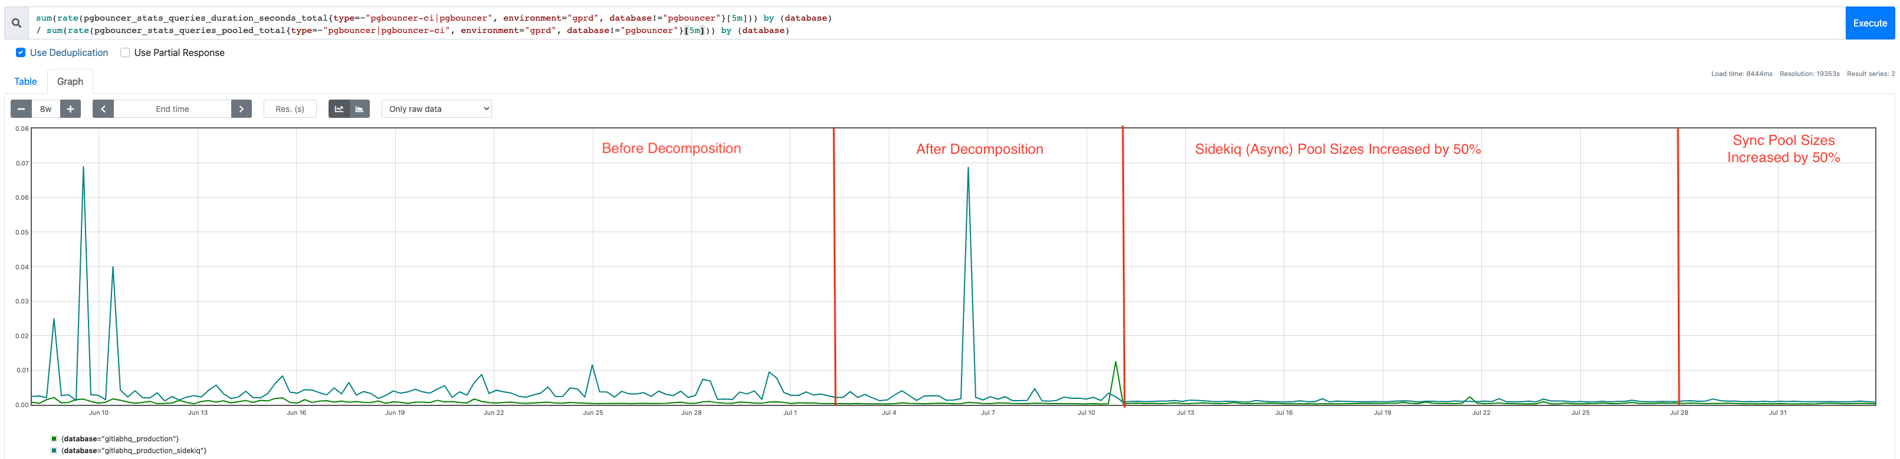 Average active query duration by workload shows a decrease after scaling connections after decomposition